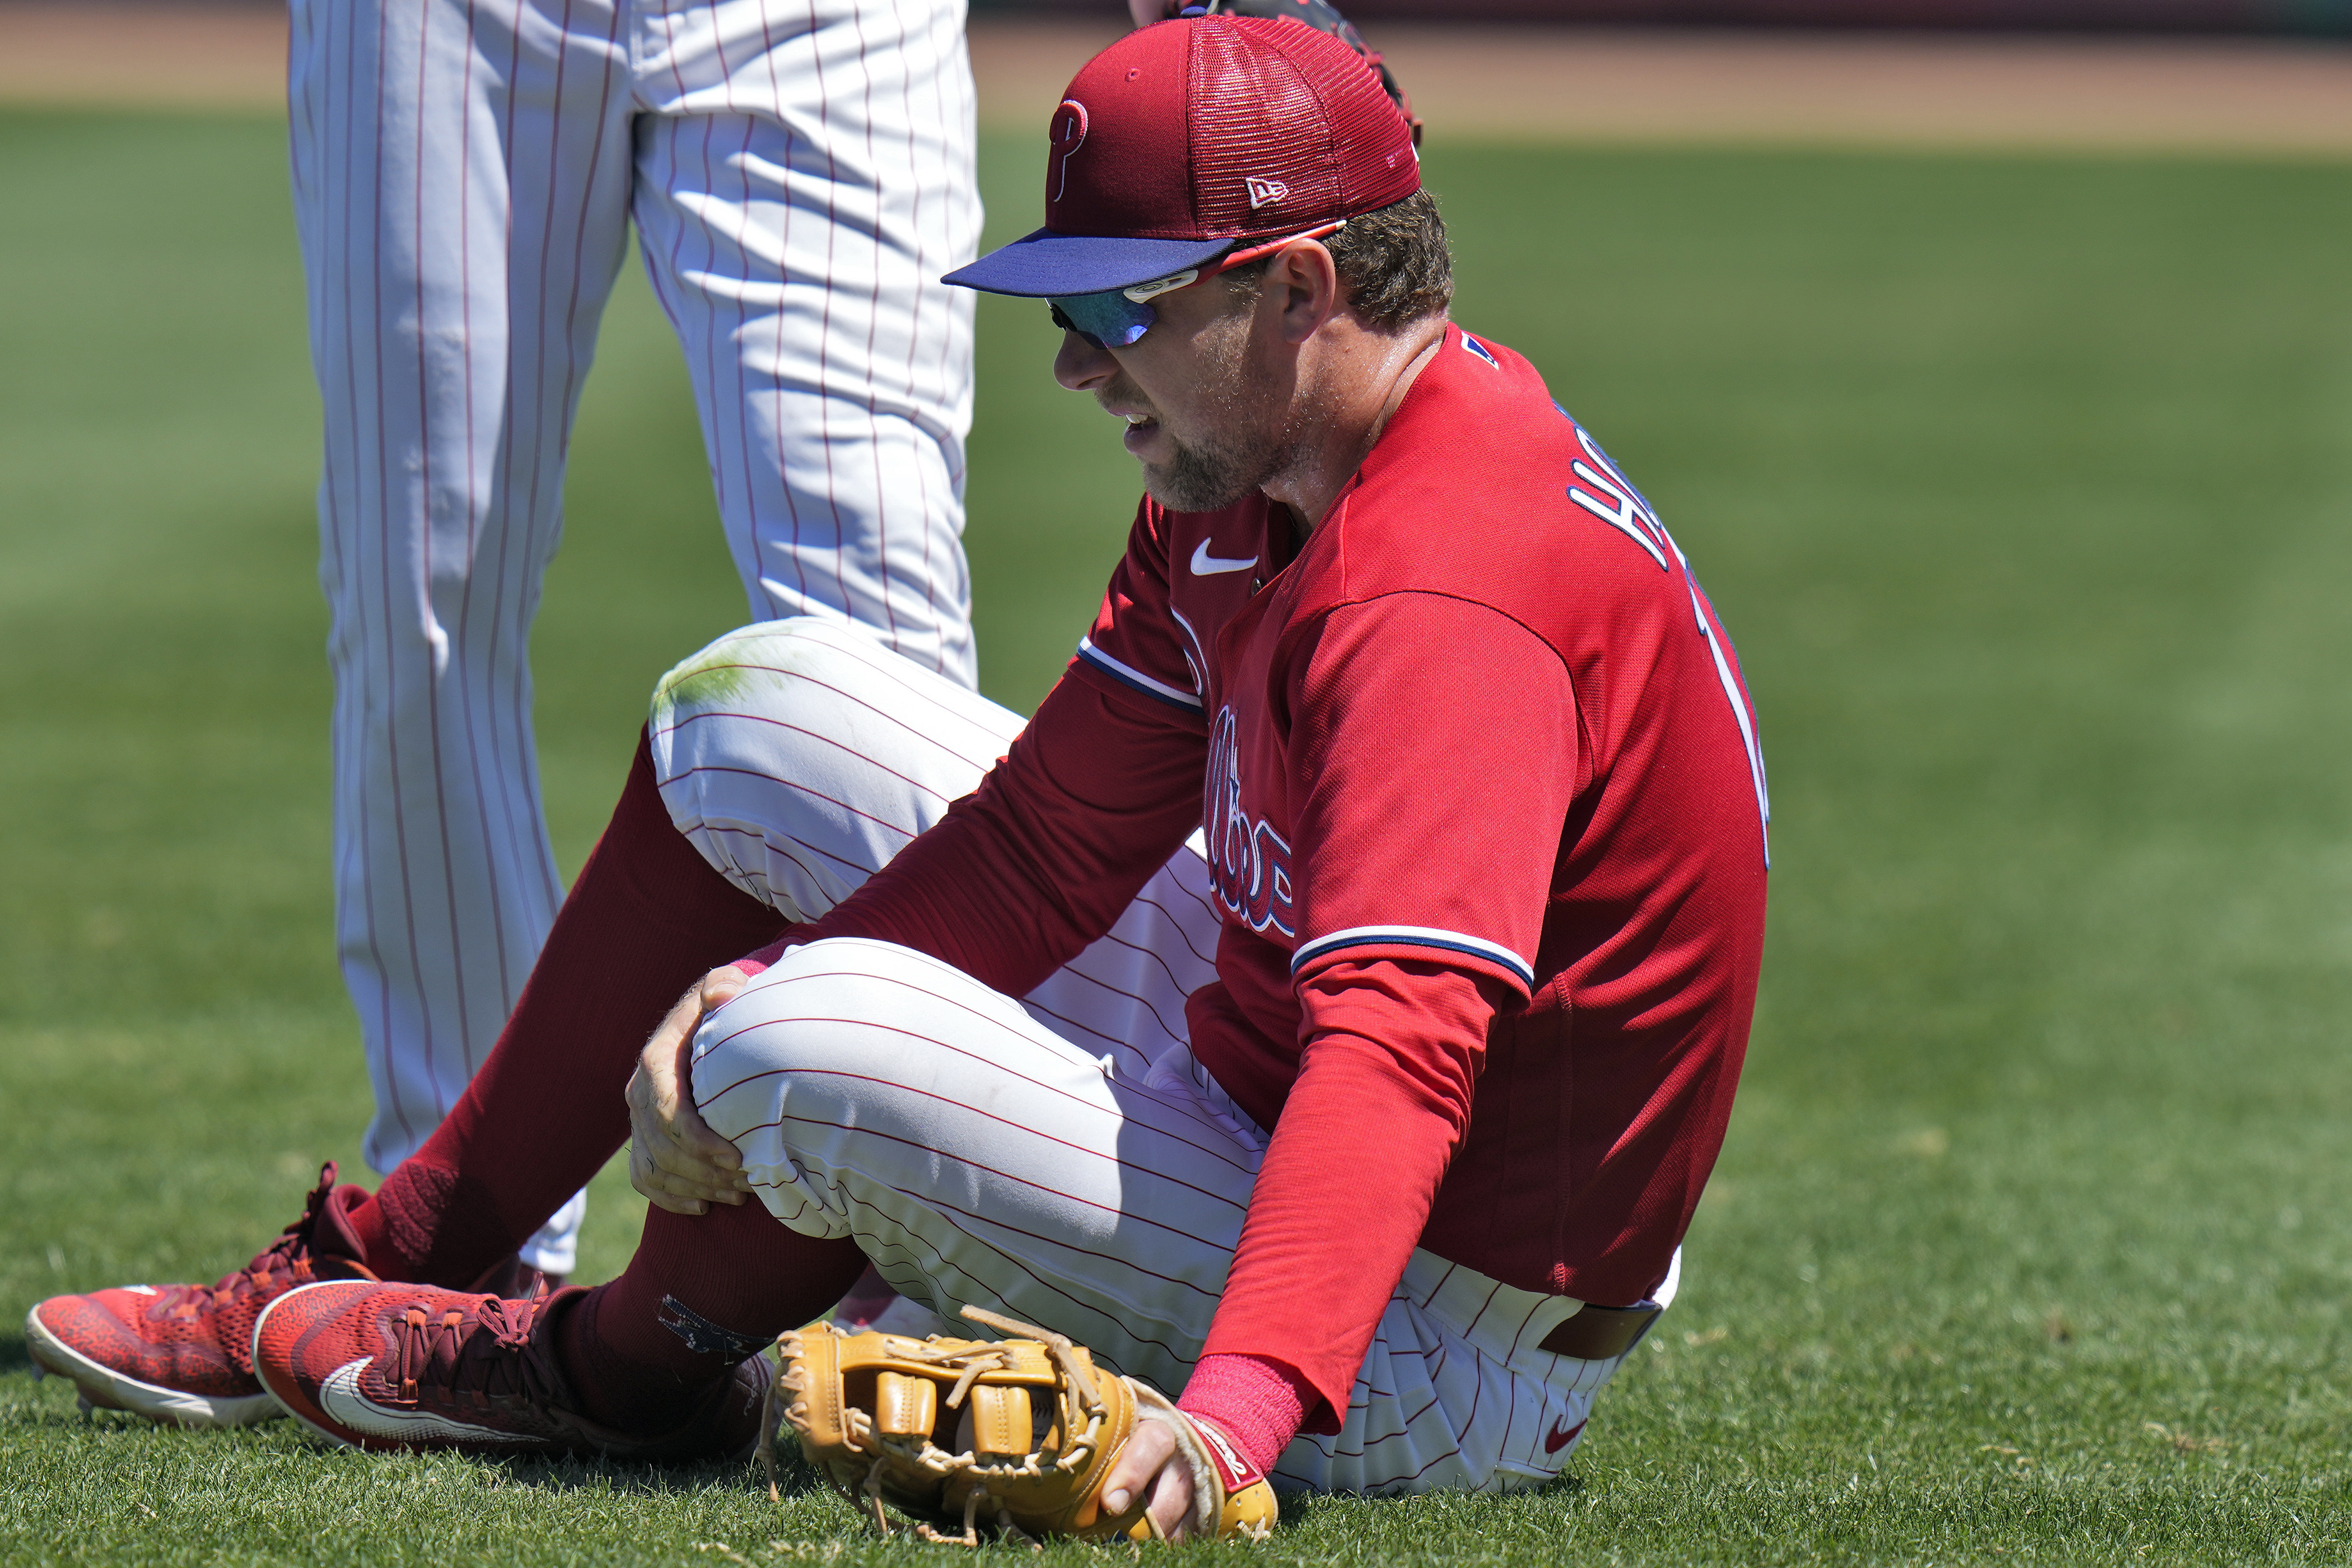 Rhys Hoskins diagnosed with torn ACL following spring training